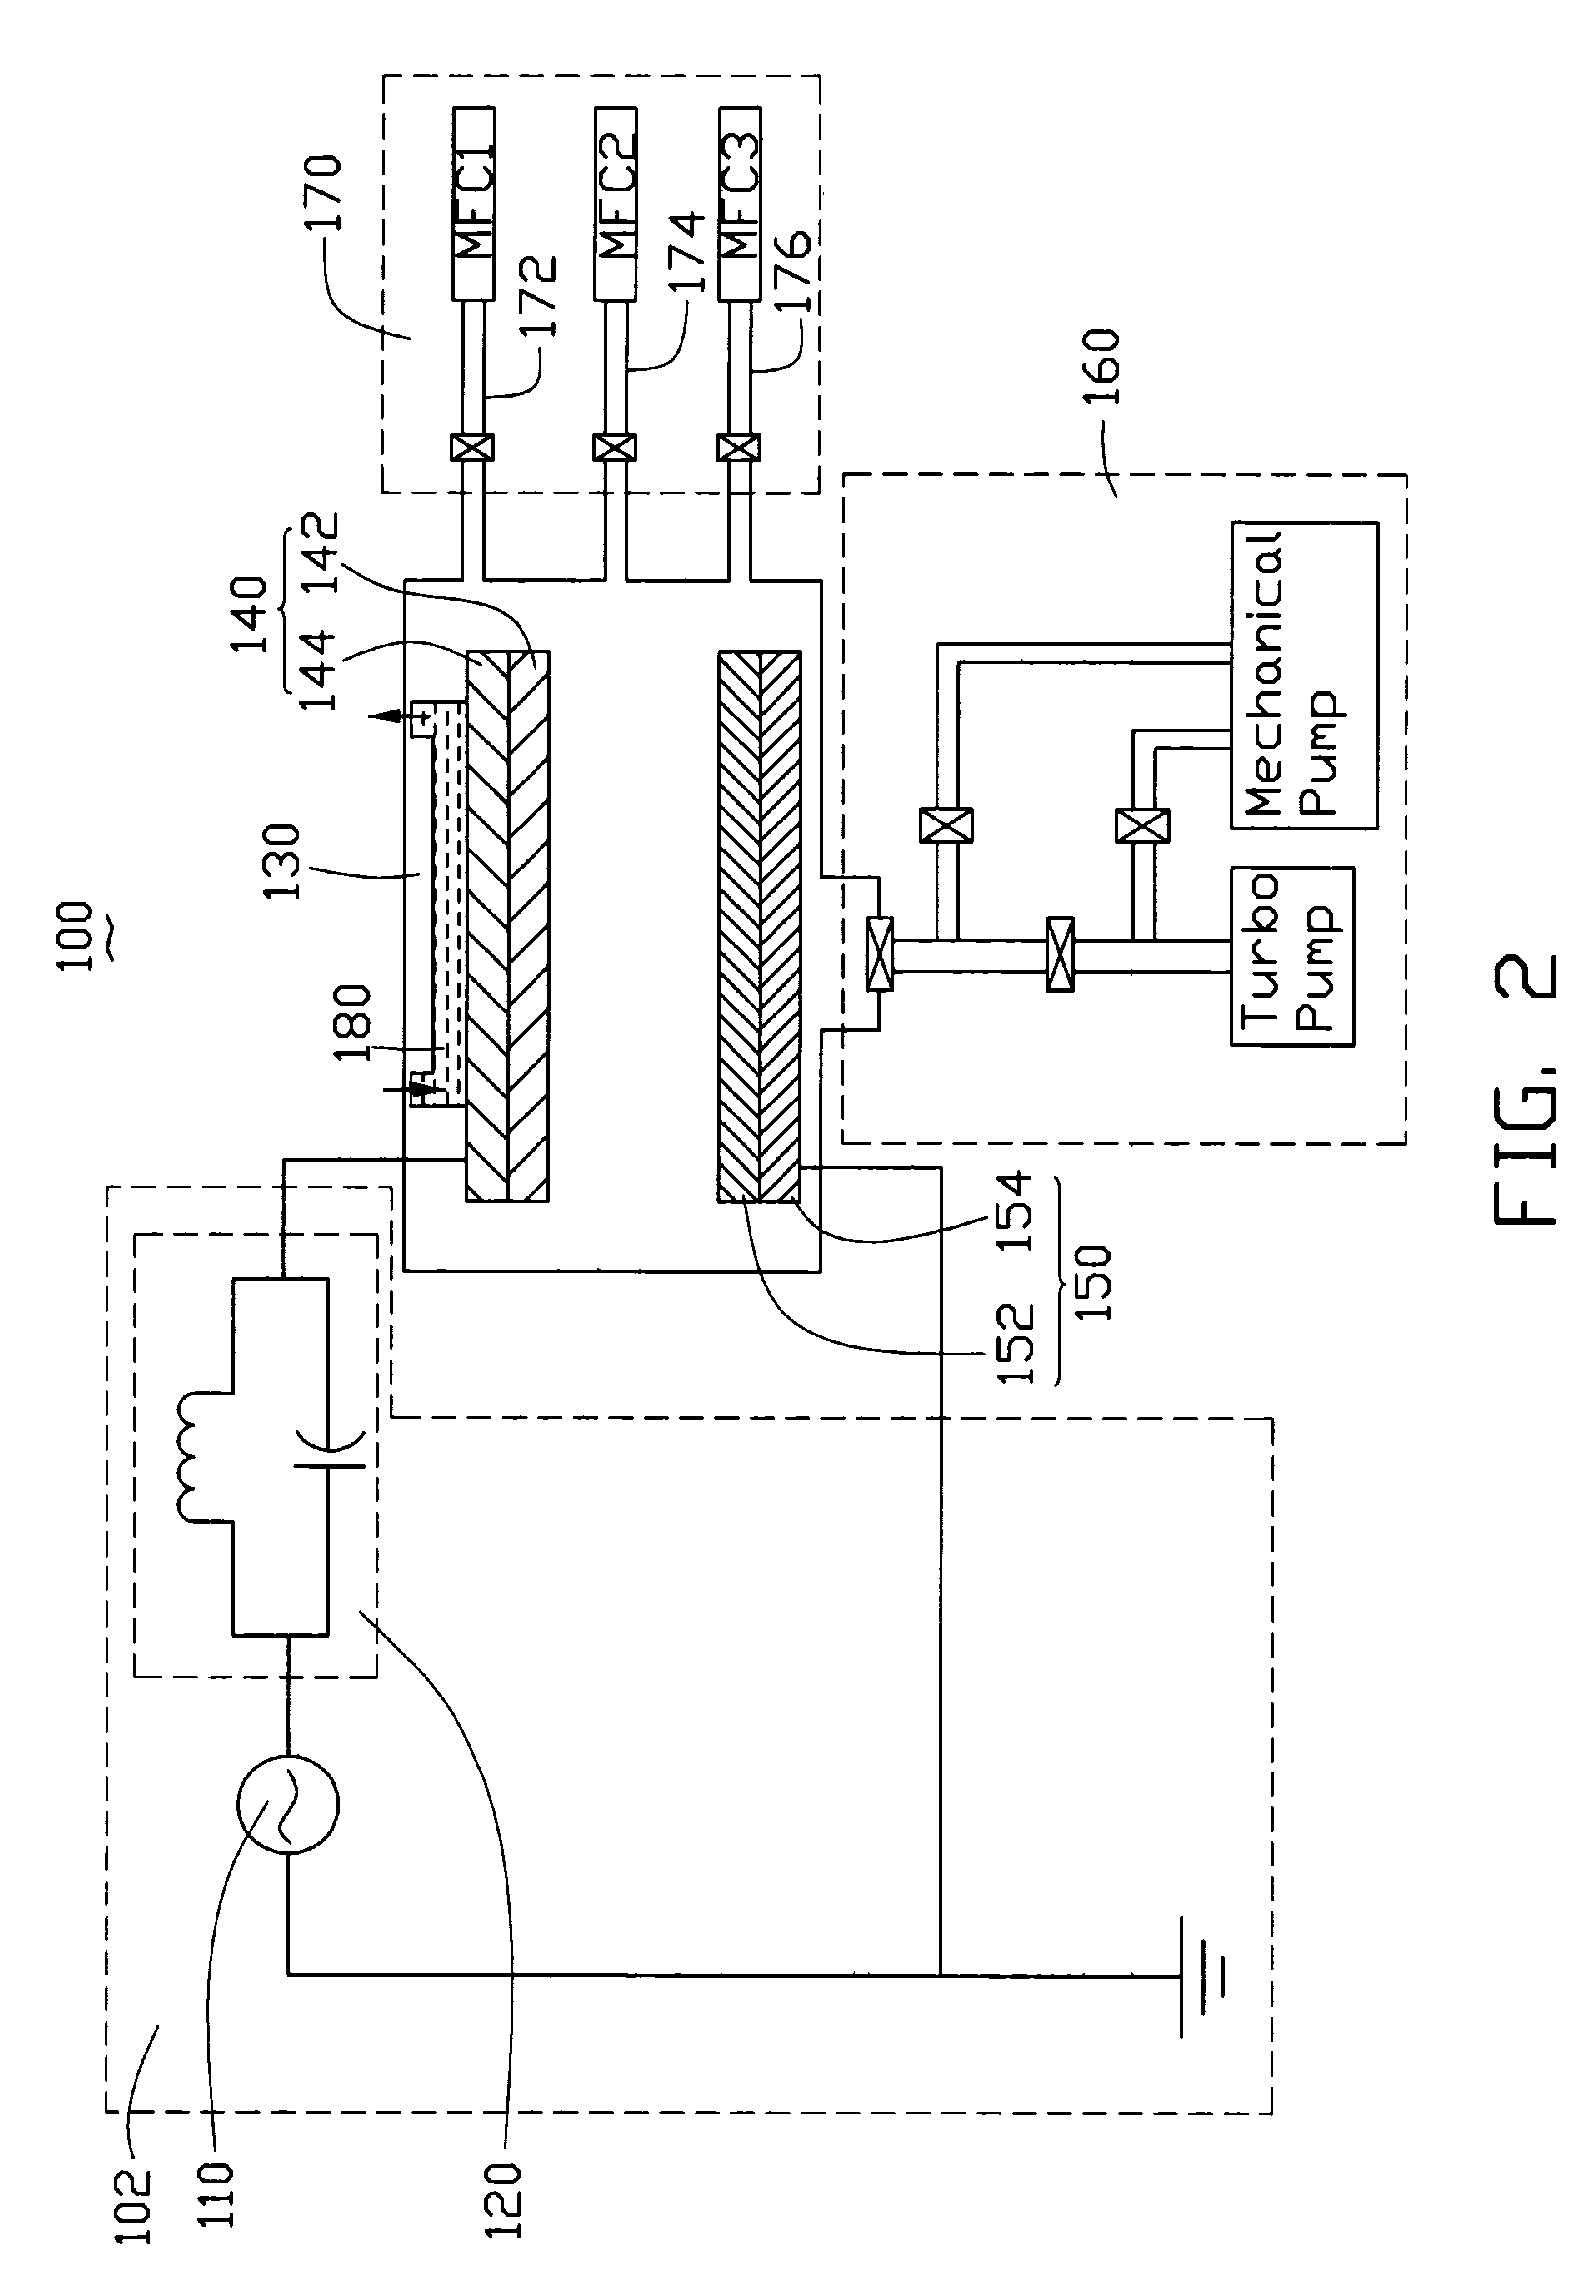 Mold for forming optical lens and method for manufacturing such mold